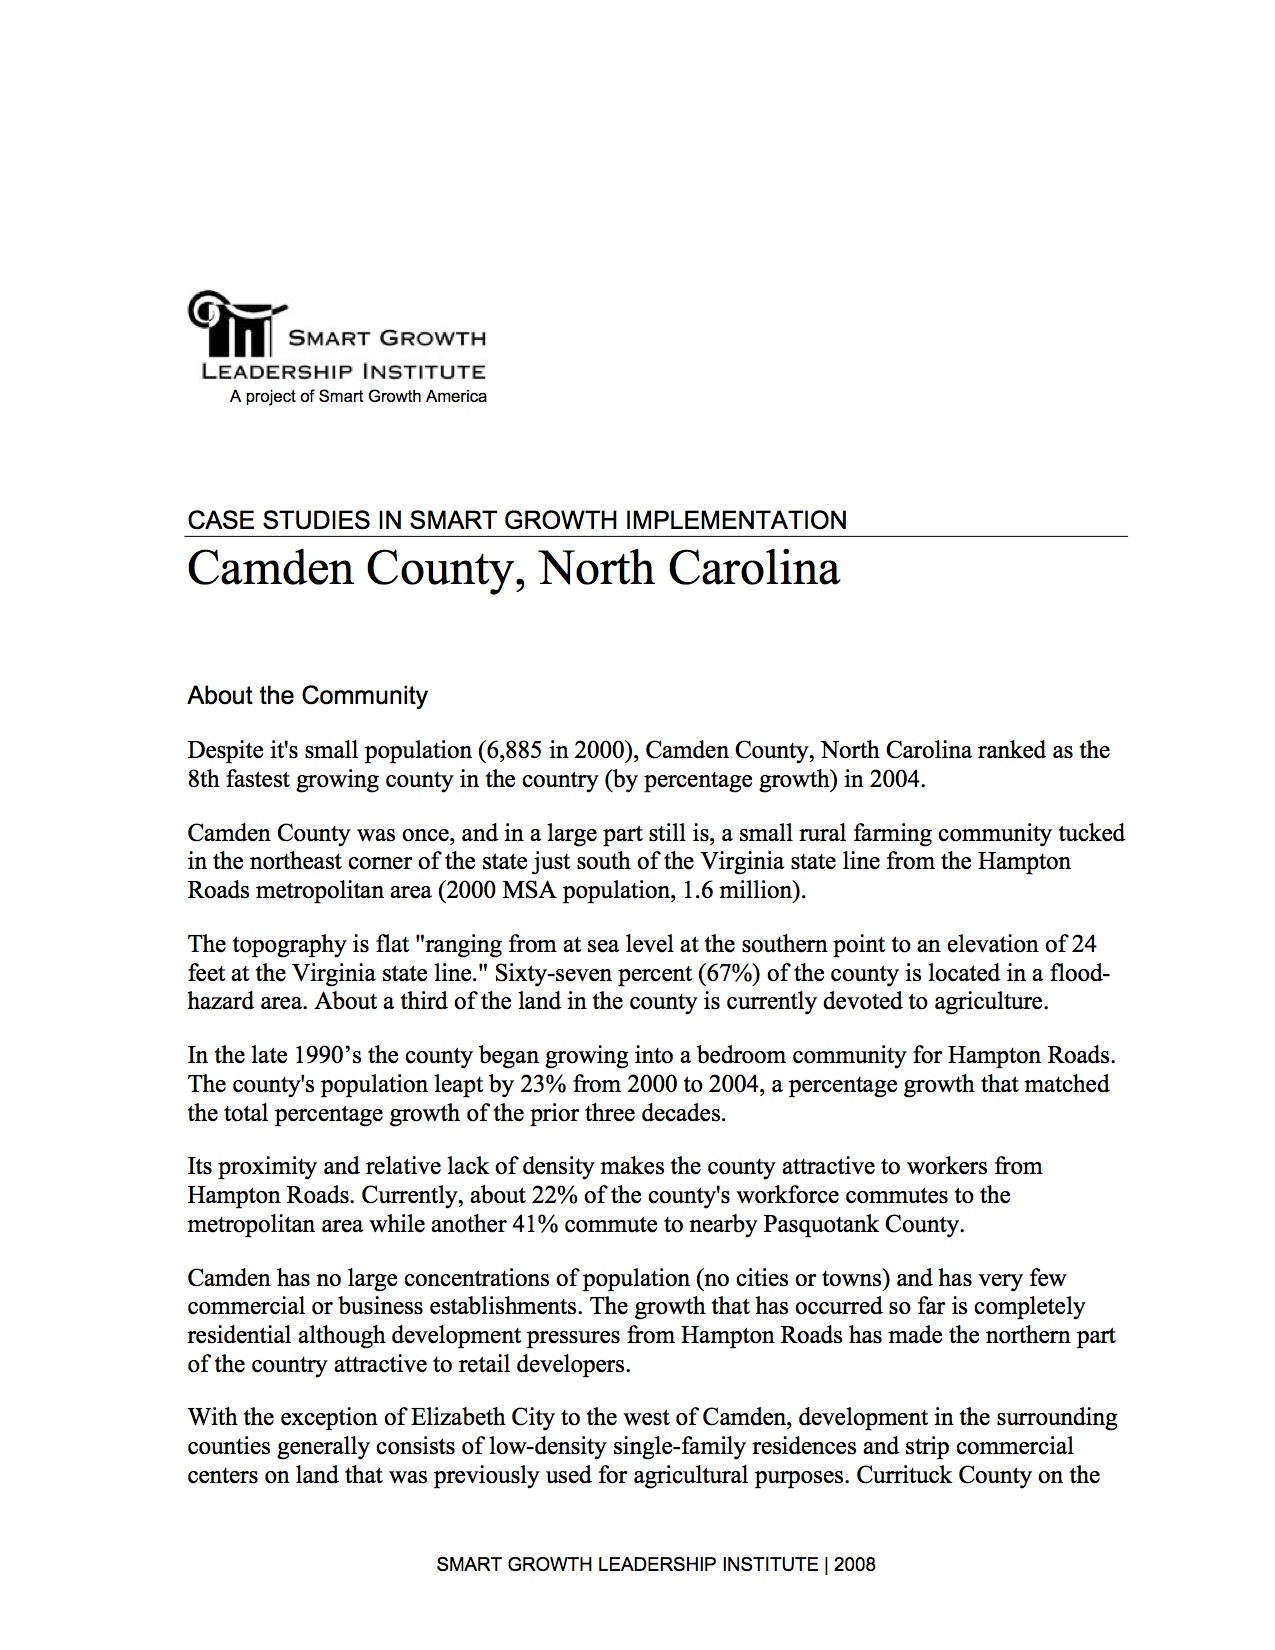 Case Studies in Smart Growth Implementation: Camden County, North Carolina